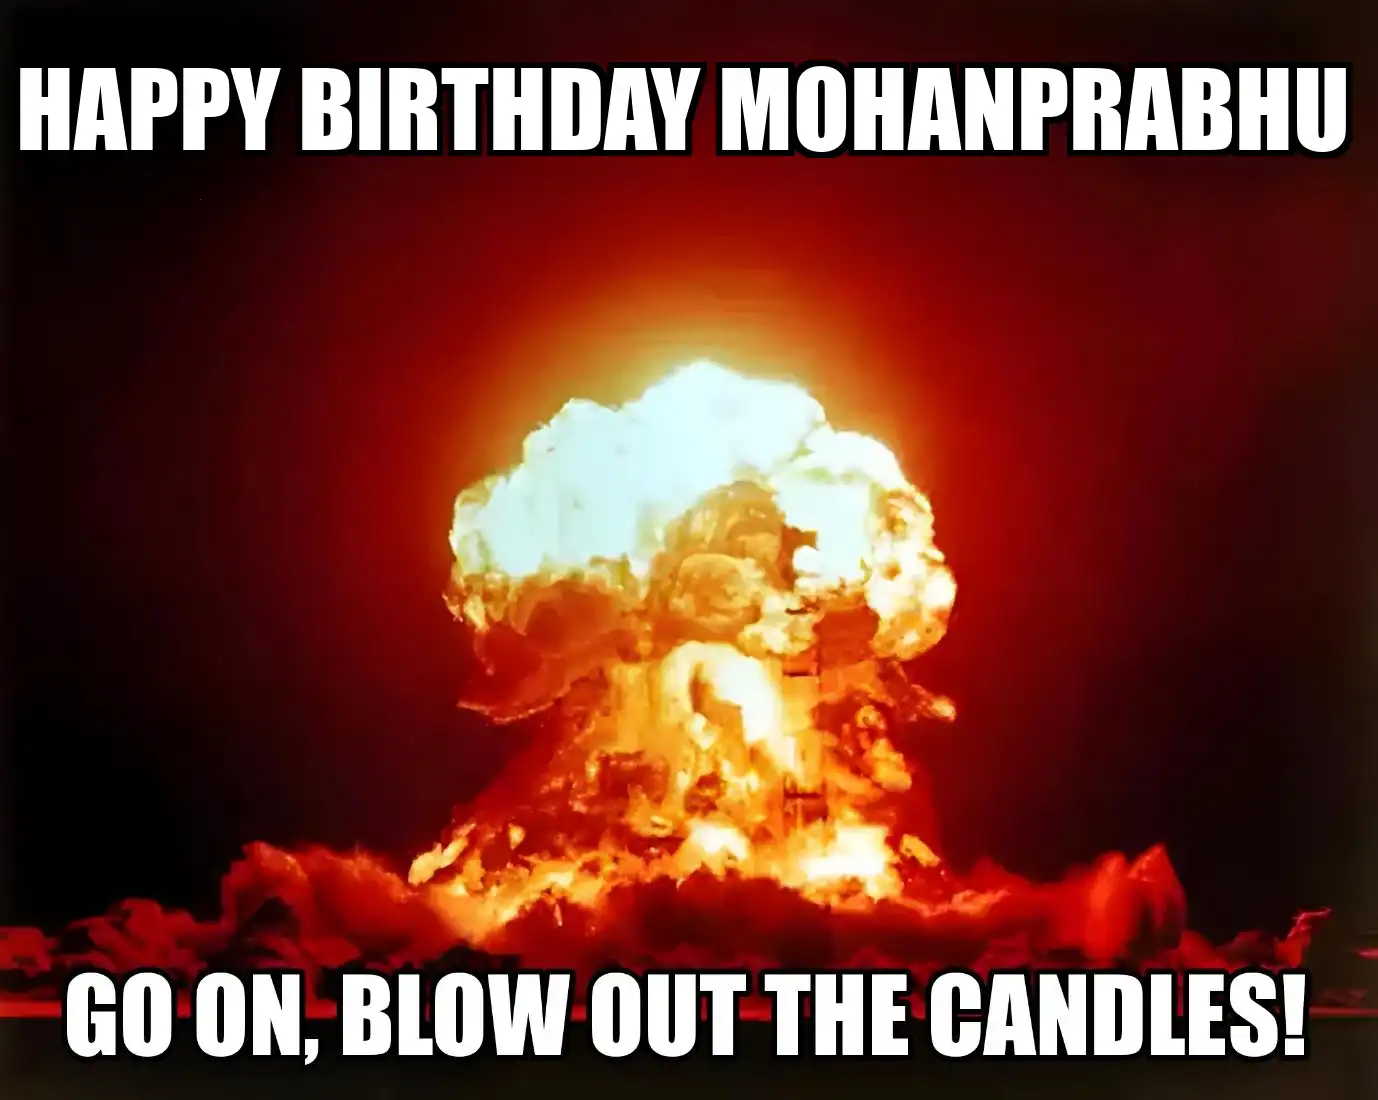 Happy Birthday Mohanprabhu Go On Blow Out The Candles Meme